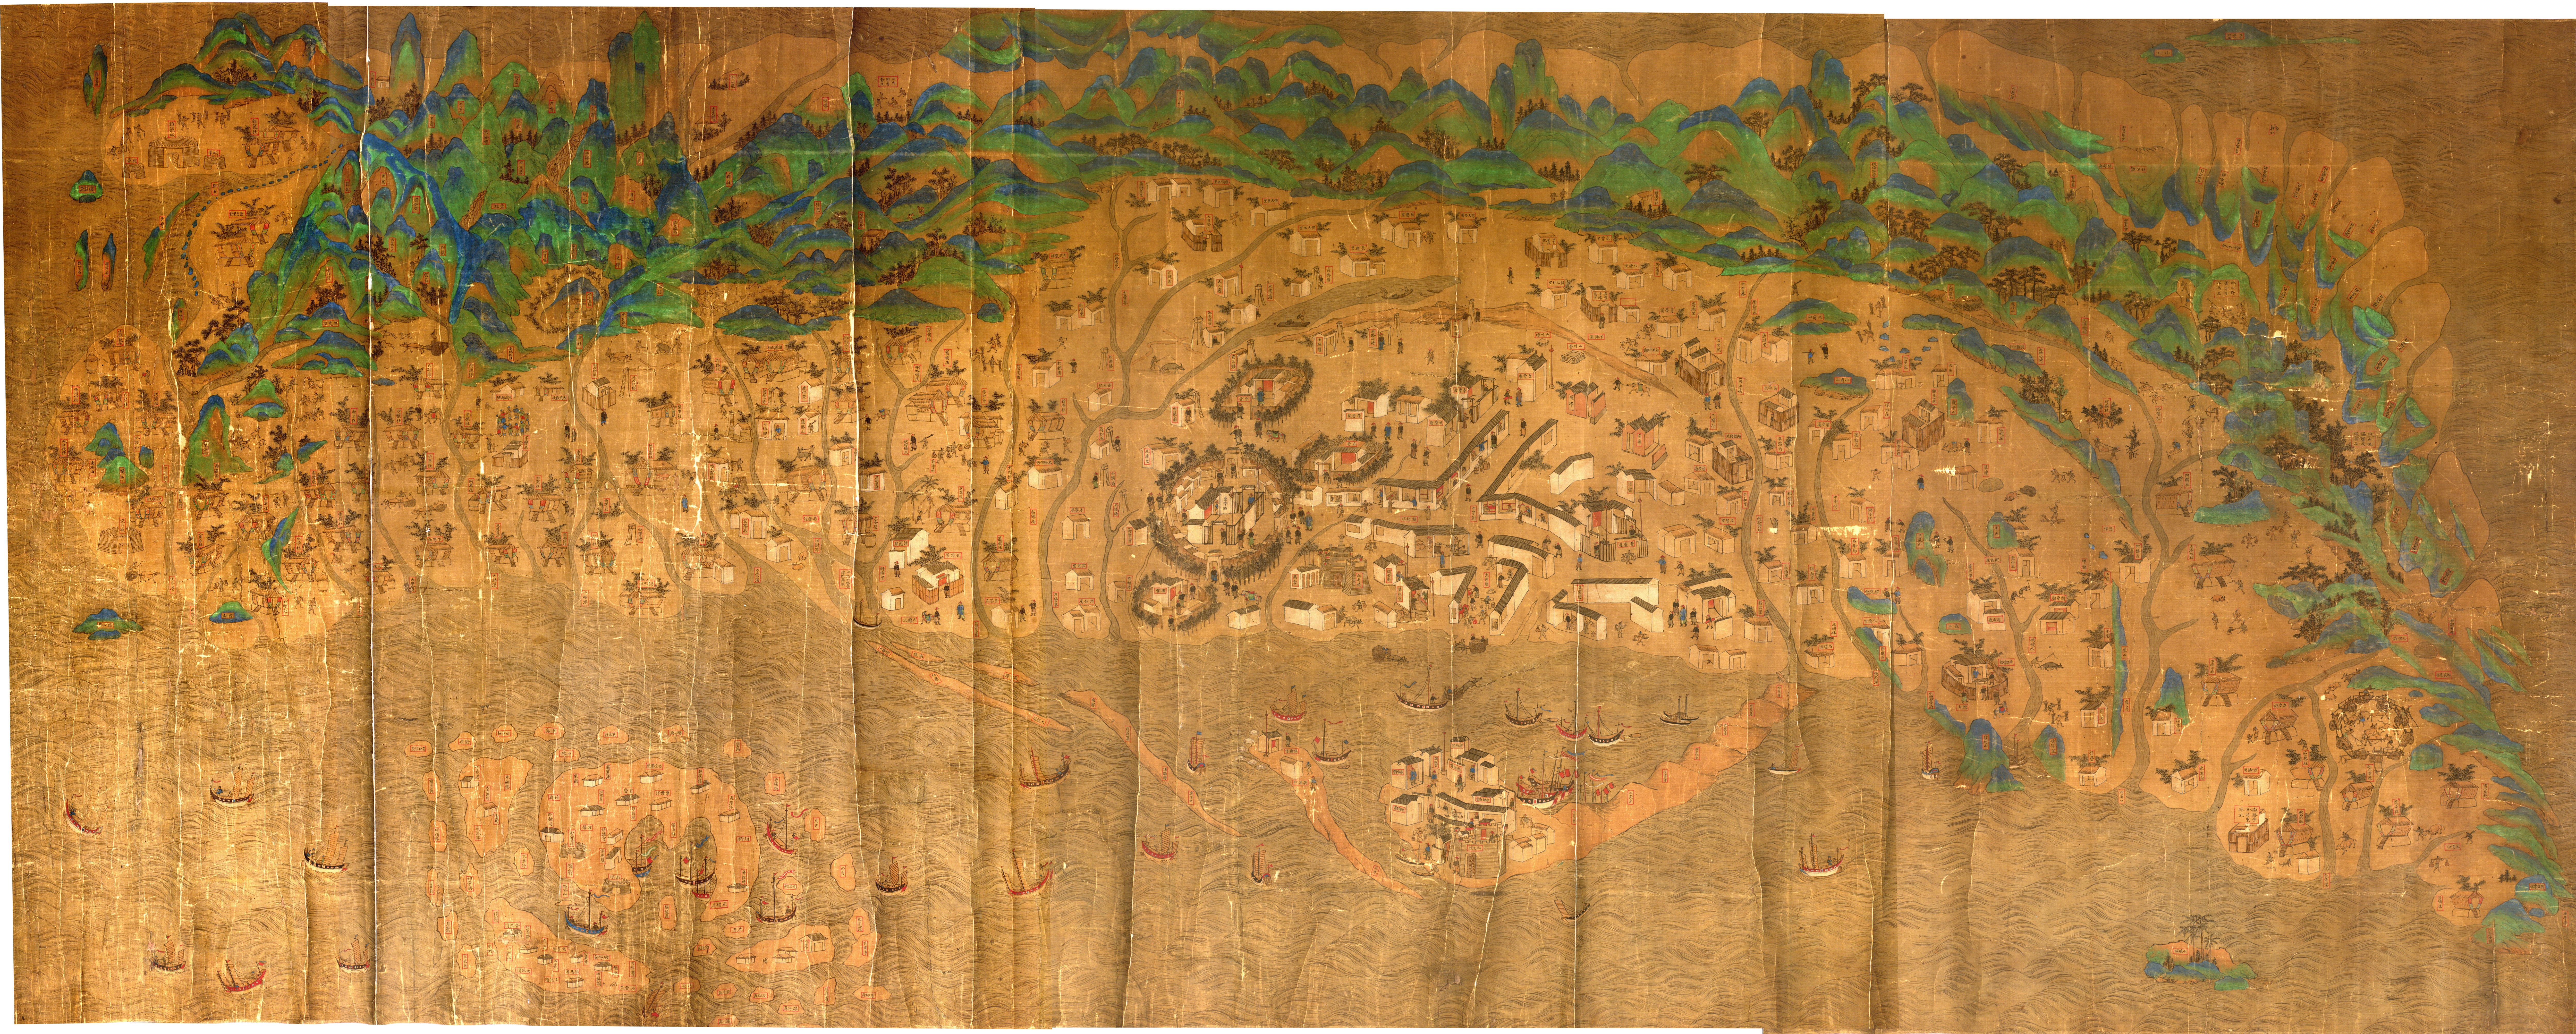 Painting of Taiwan from the Kangxi period showing the architectural differences between indigenous and Chinese inhabited areas.